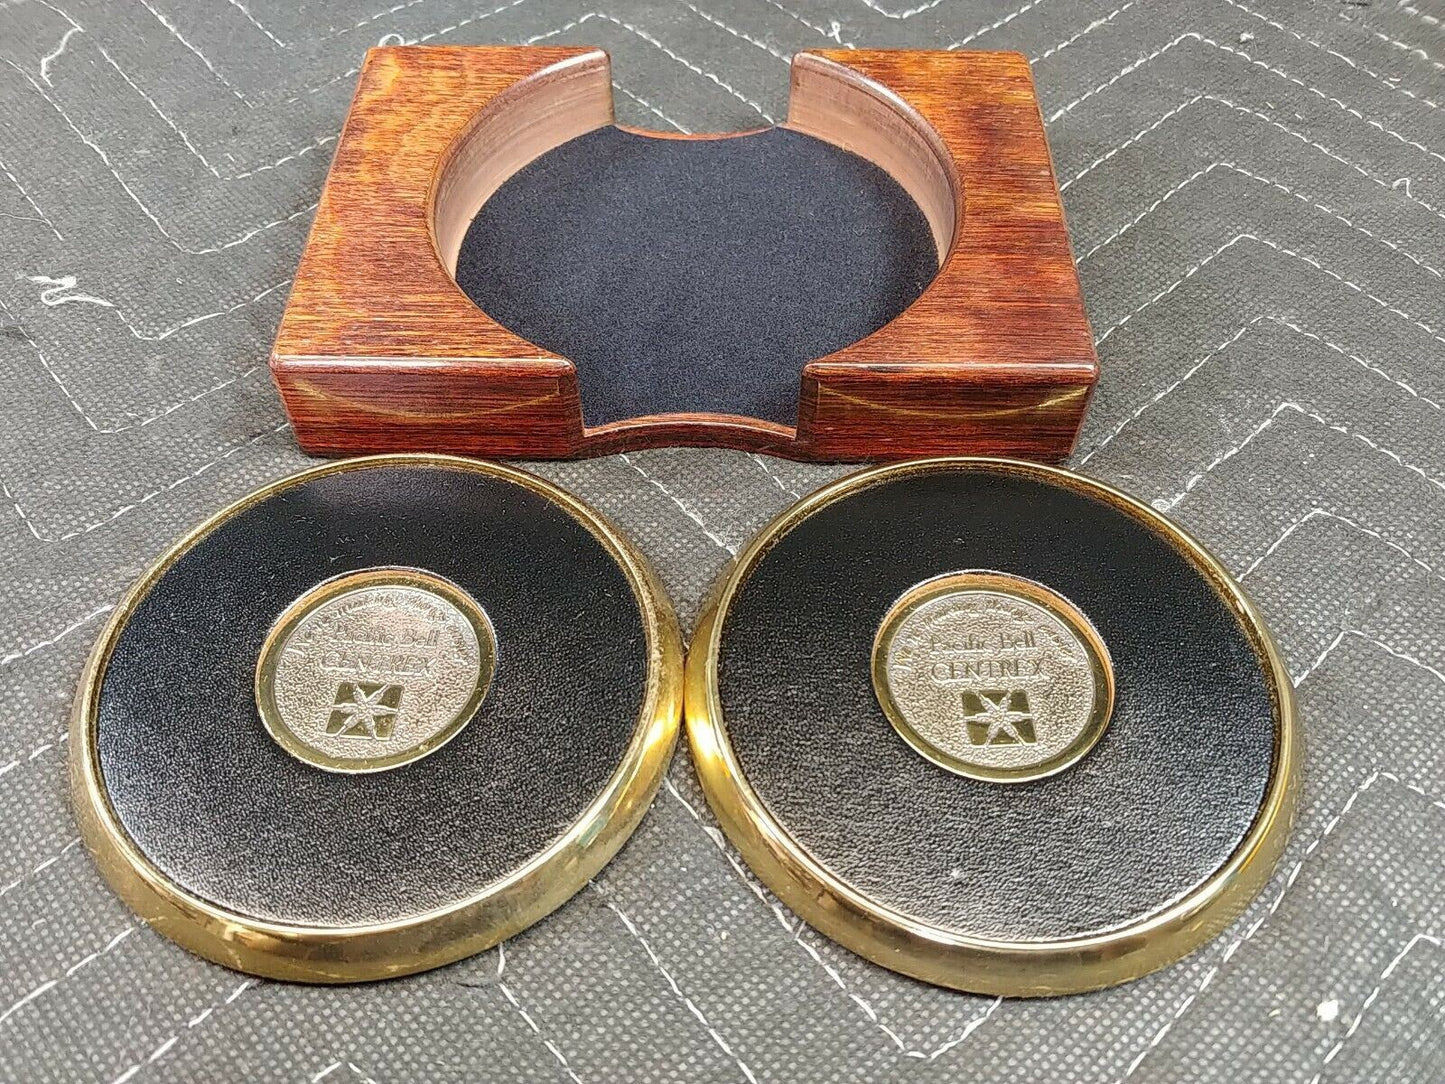 PACIFIC BELL CENTREX Program Coasters Wood & Brass - Display Quality